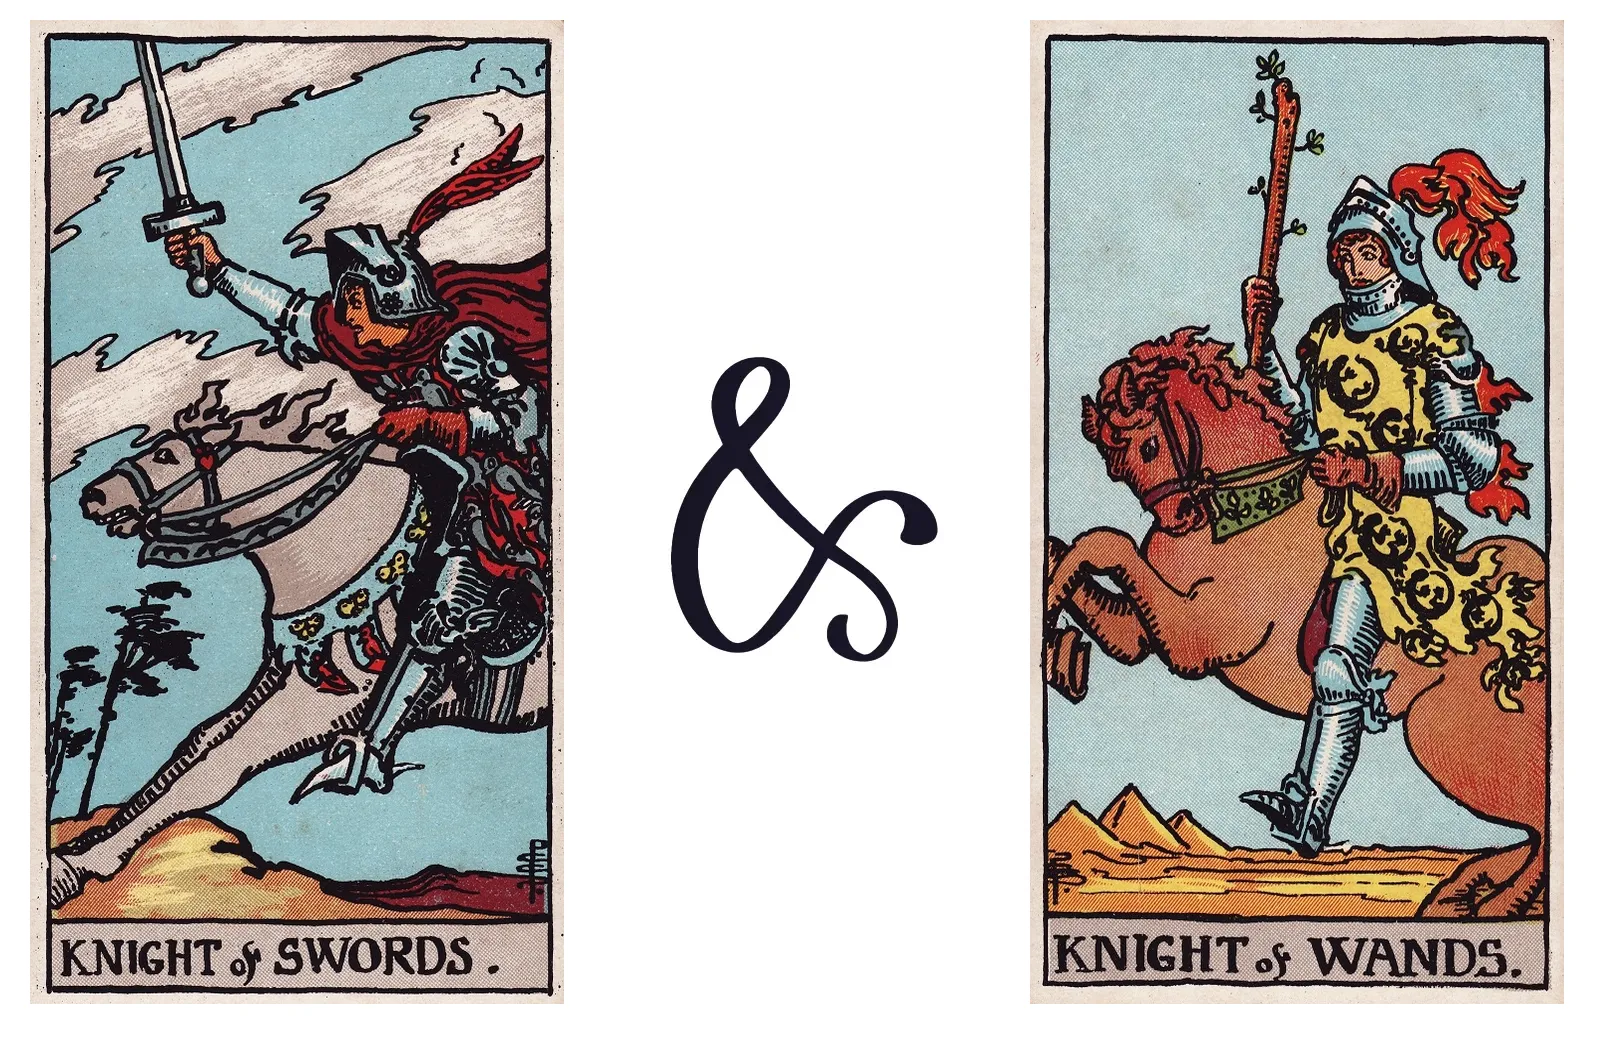 Knight of Swords and Knight of Wands